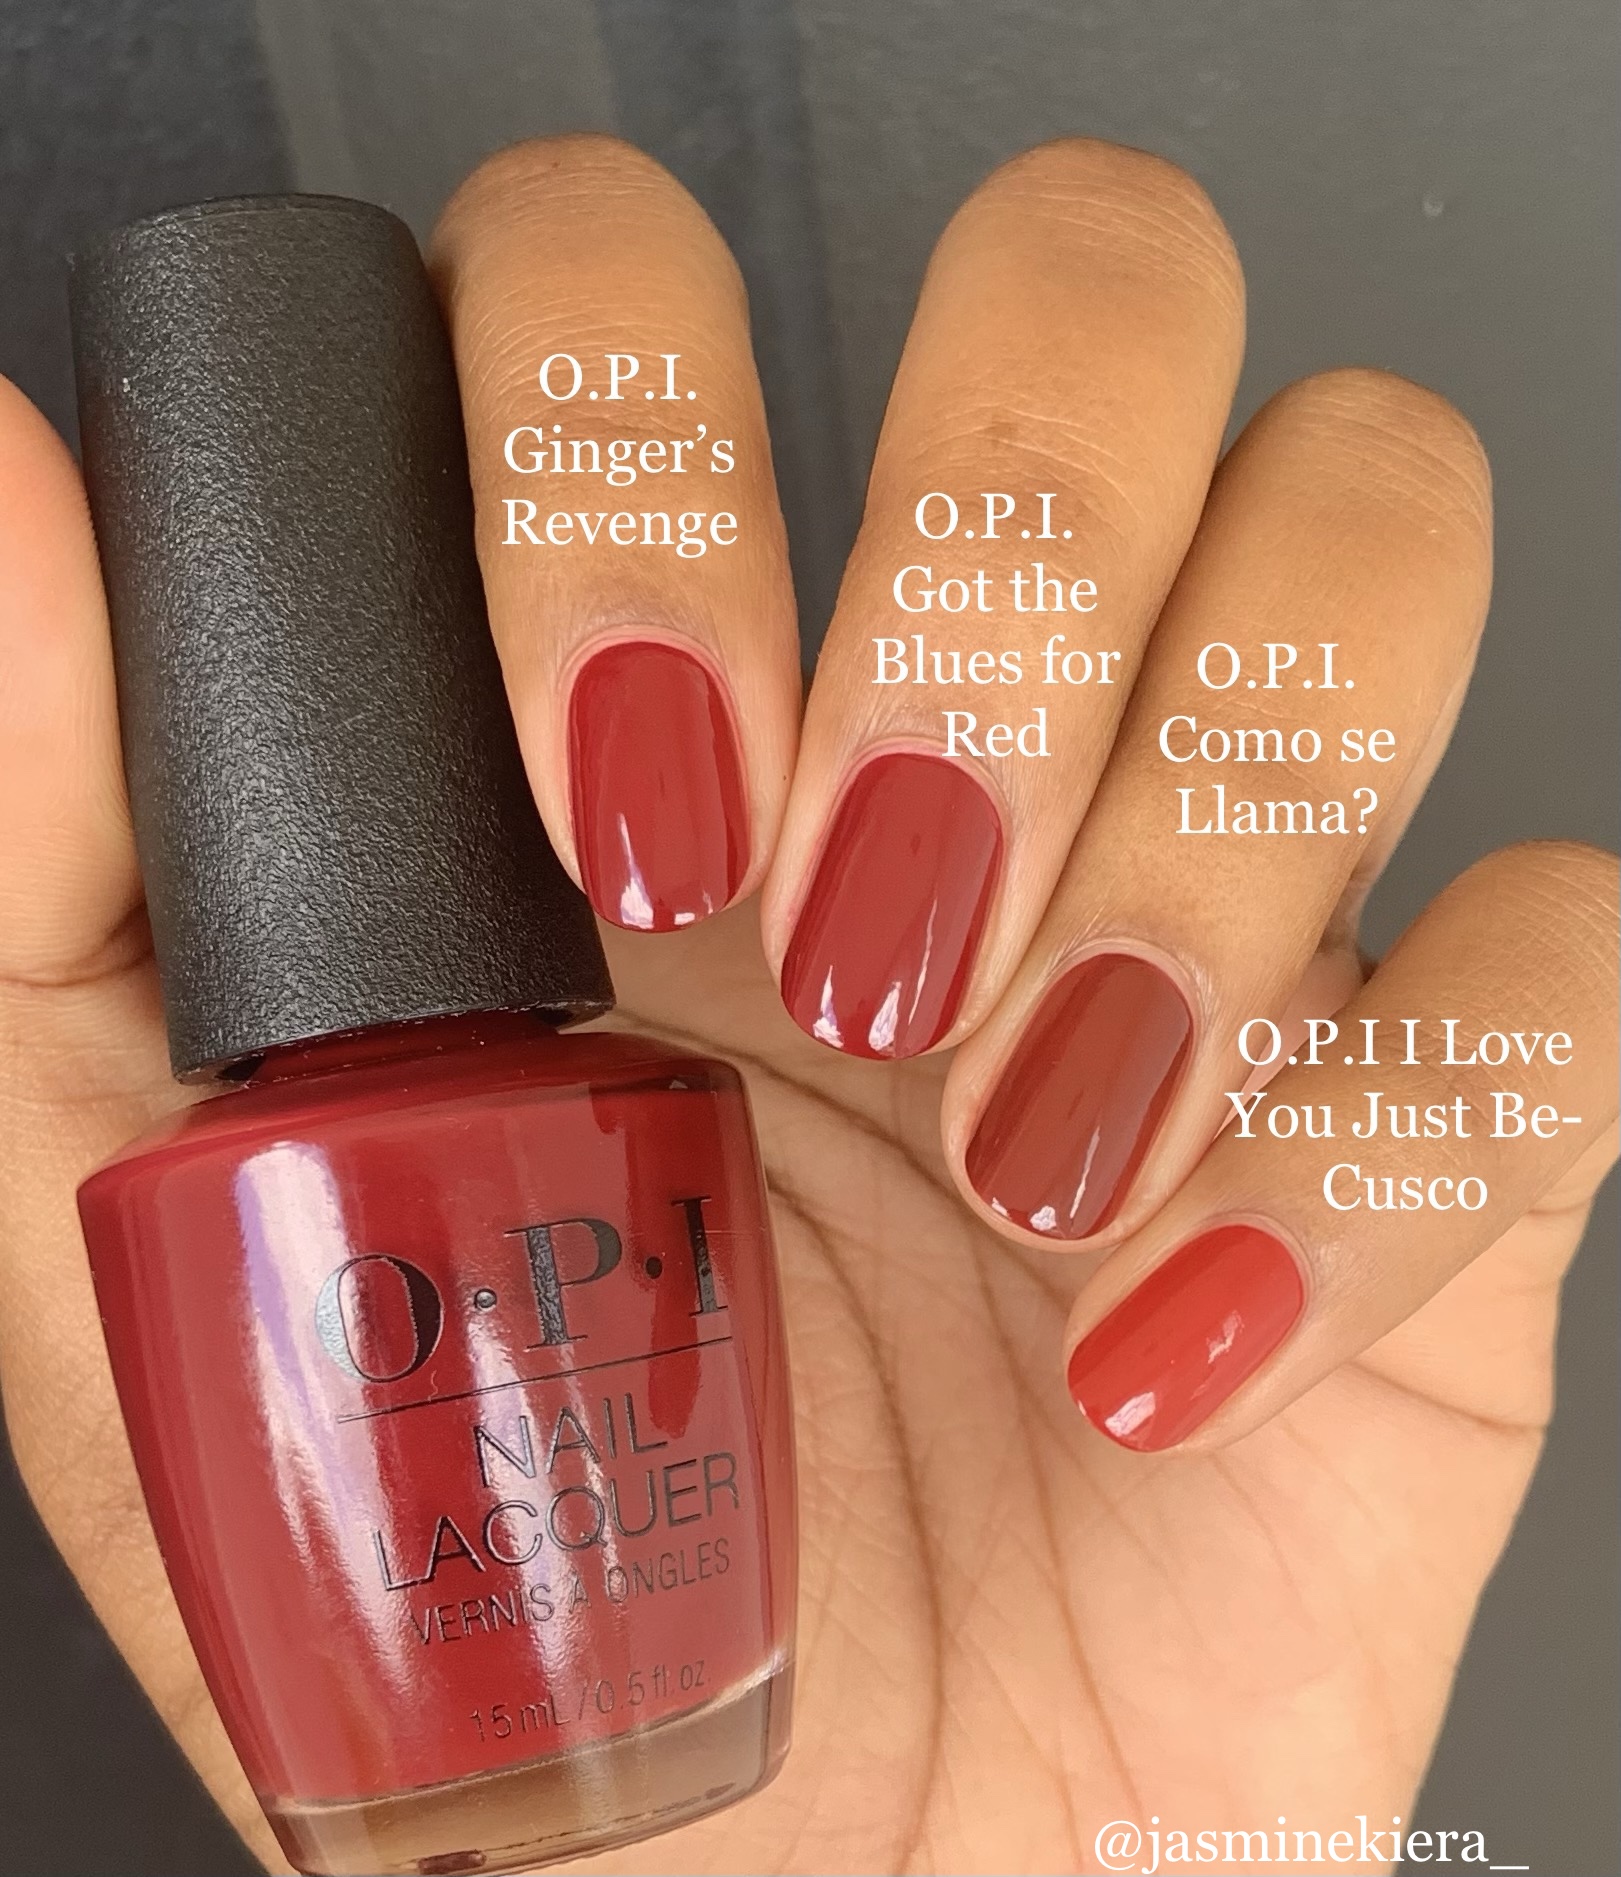 OPI Red Review + Comparisons — Lots of Lacquer